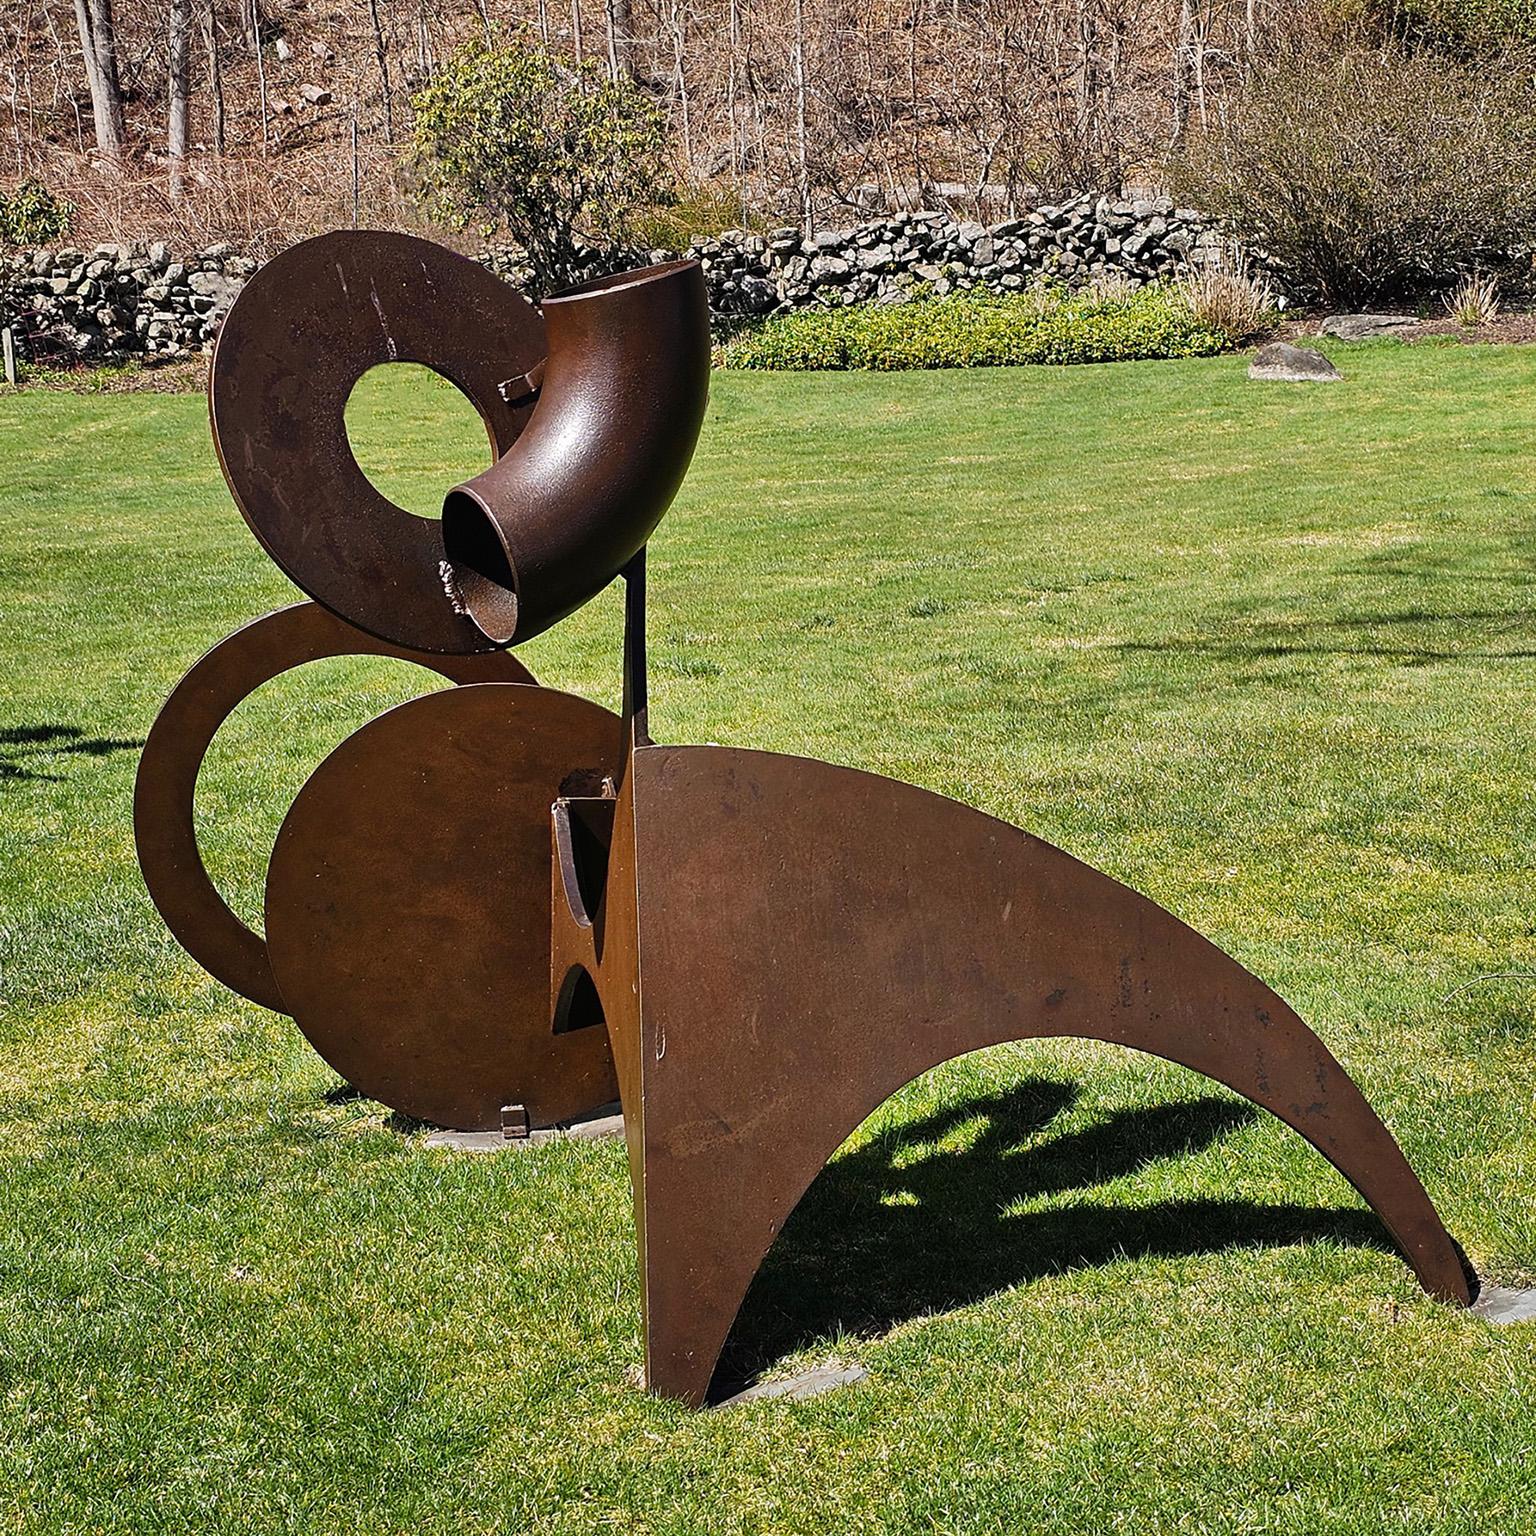 Carole Eisner Abstract Sculpture - "Circus", Abstract, Large-Scale Outdoor Metal Sculpture in steel